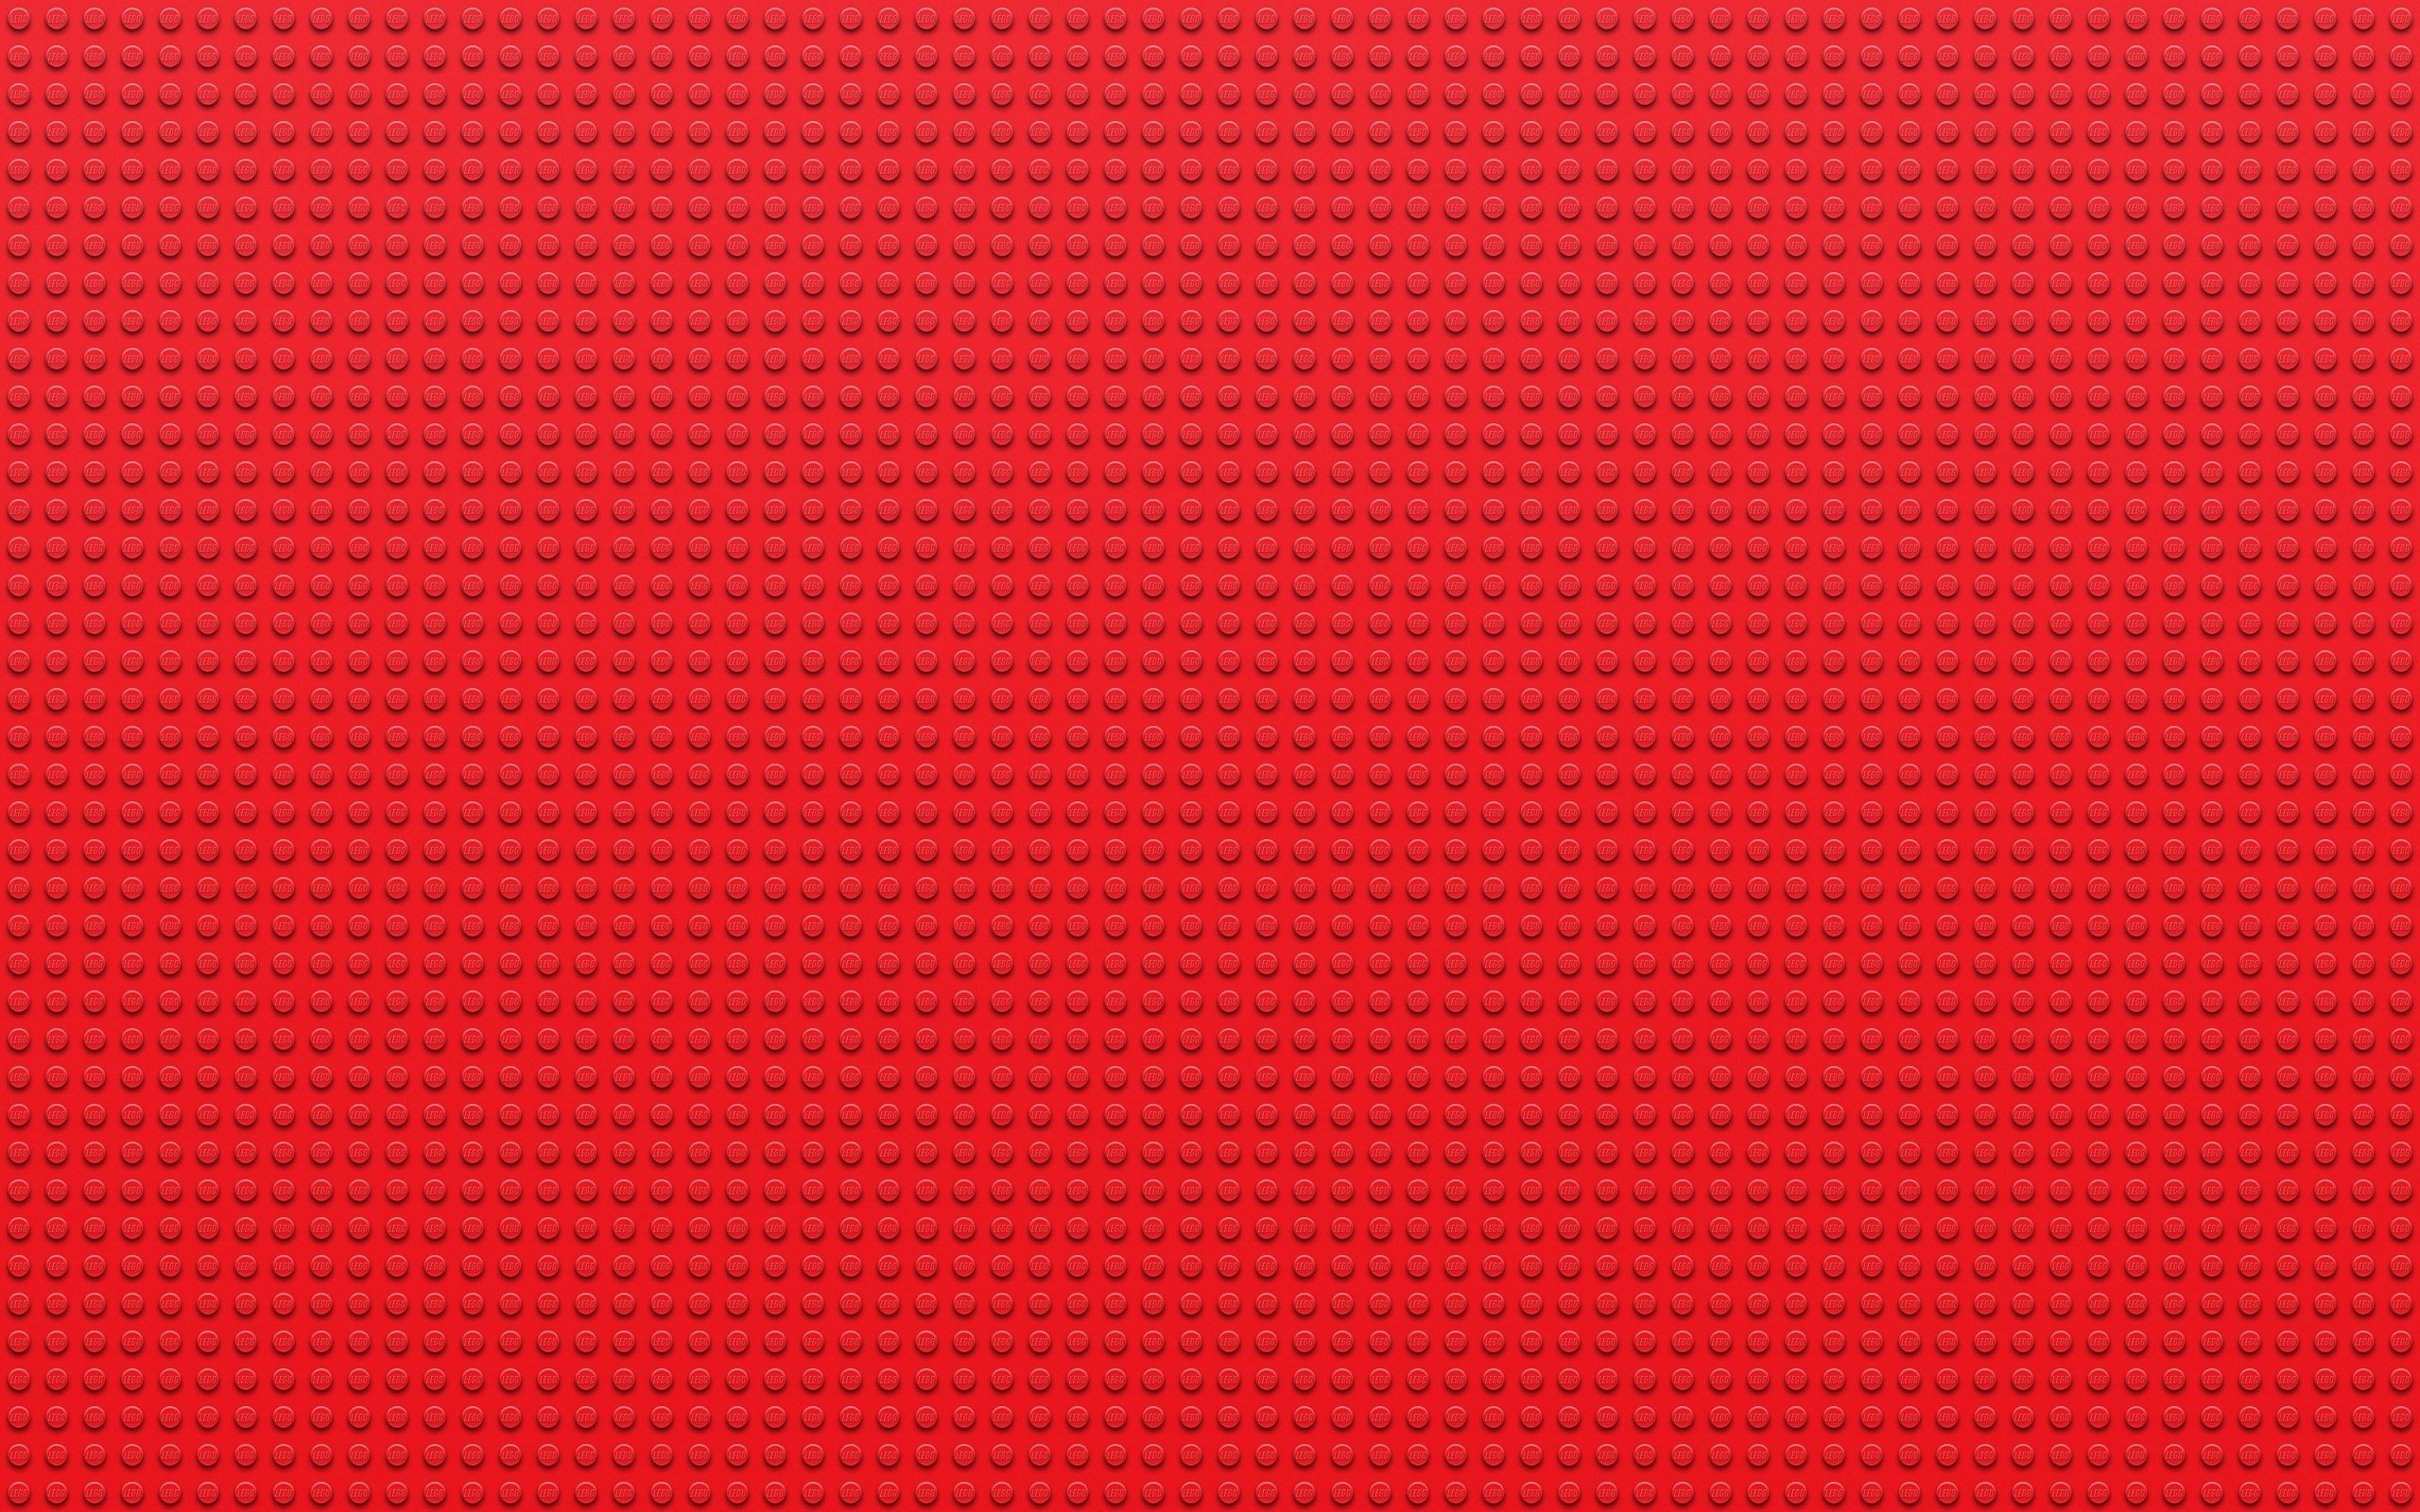 lego, textures, red, circles, texture, points, point